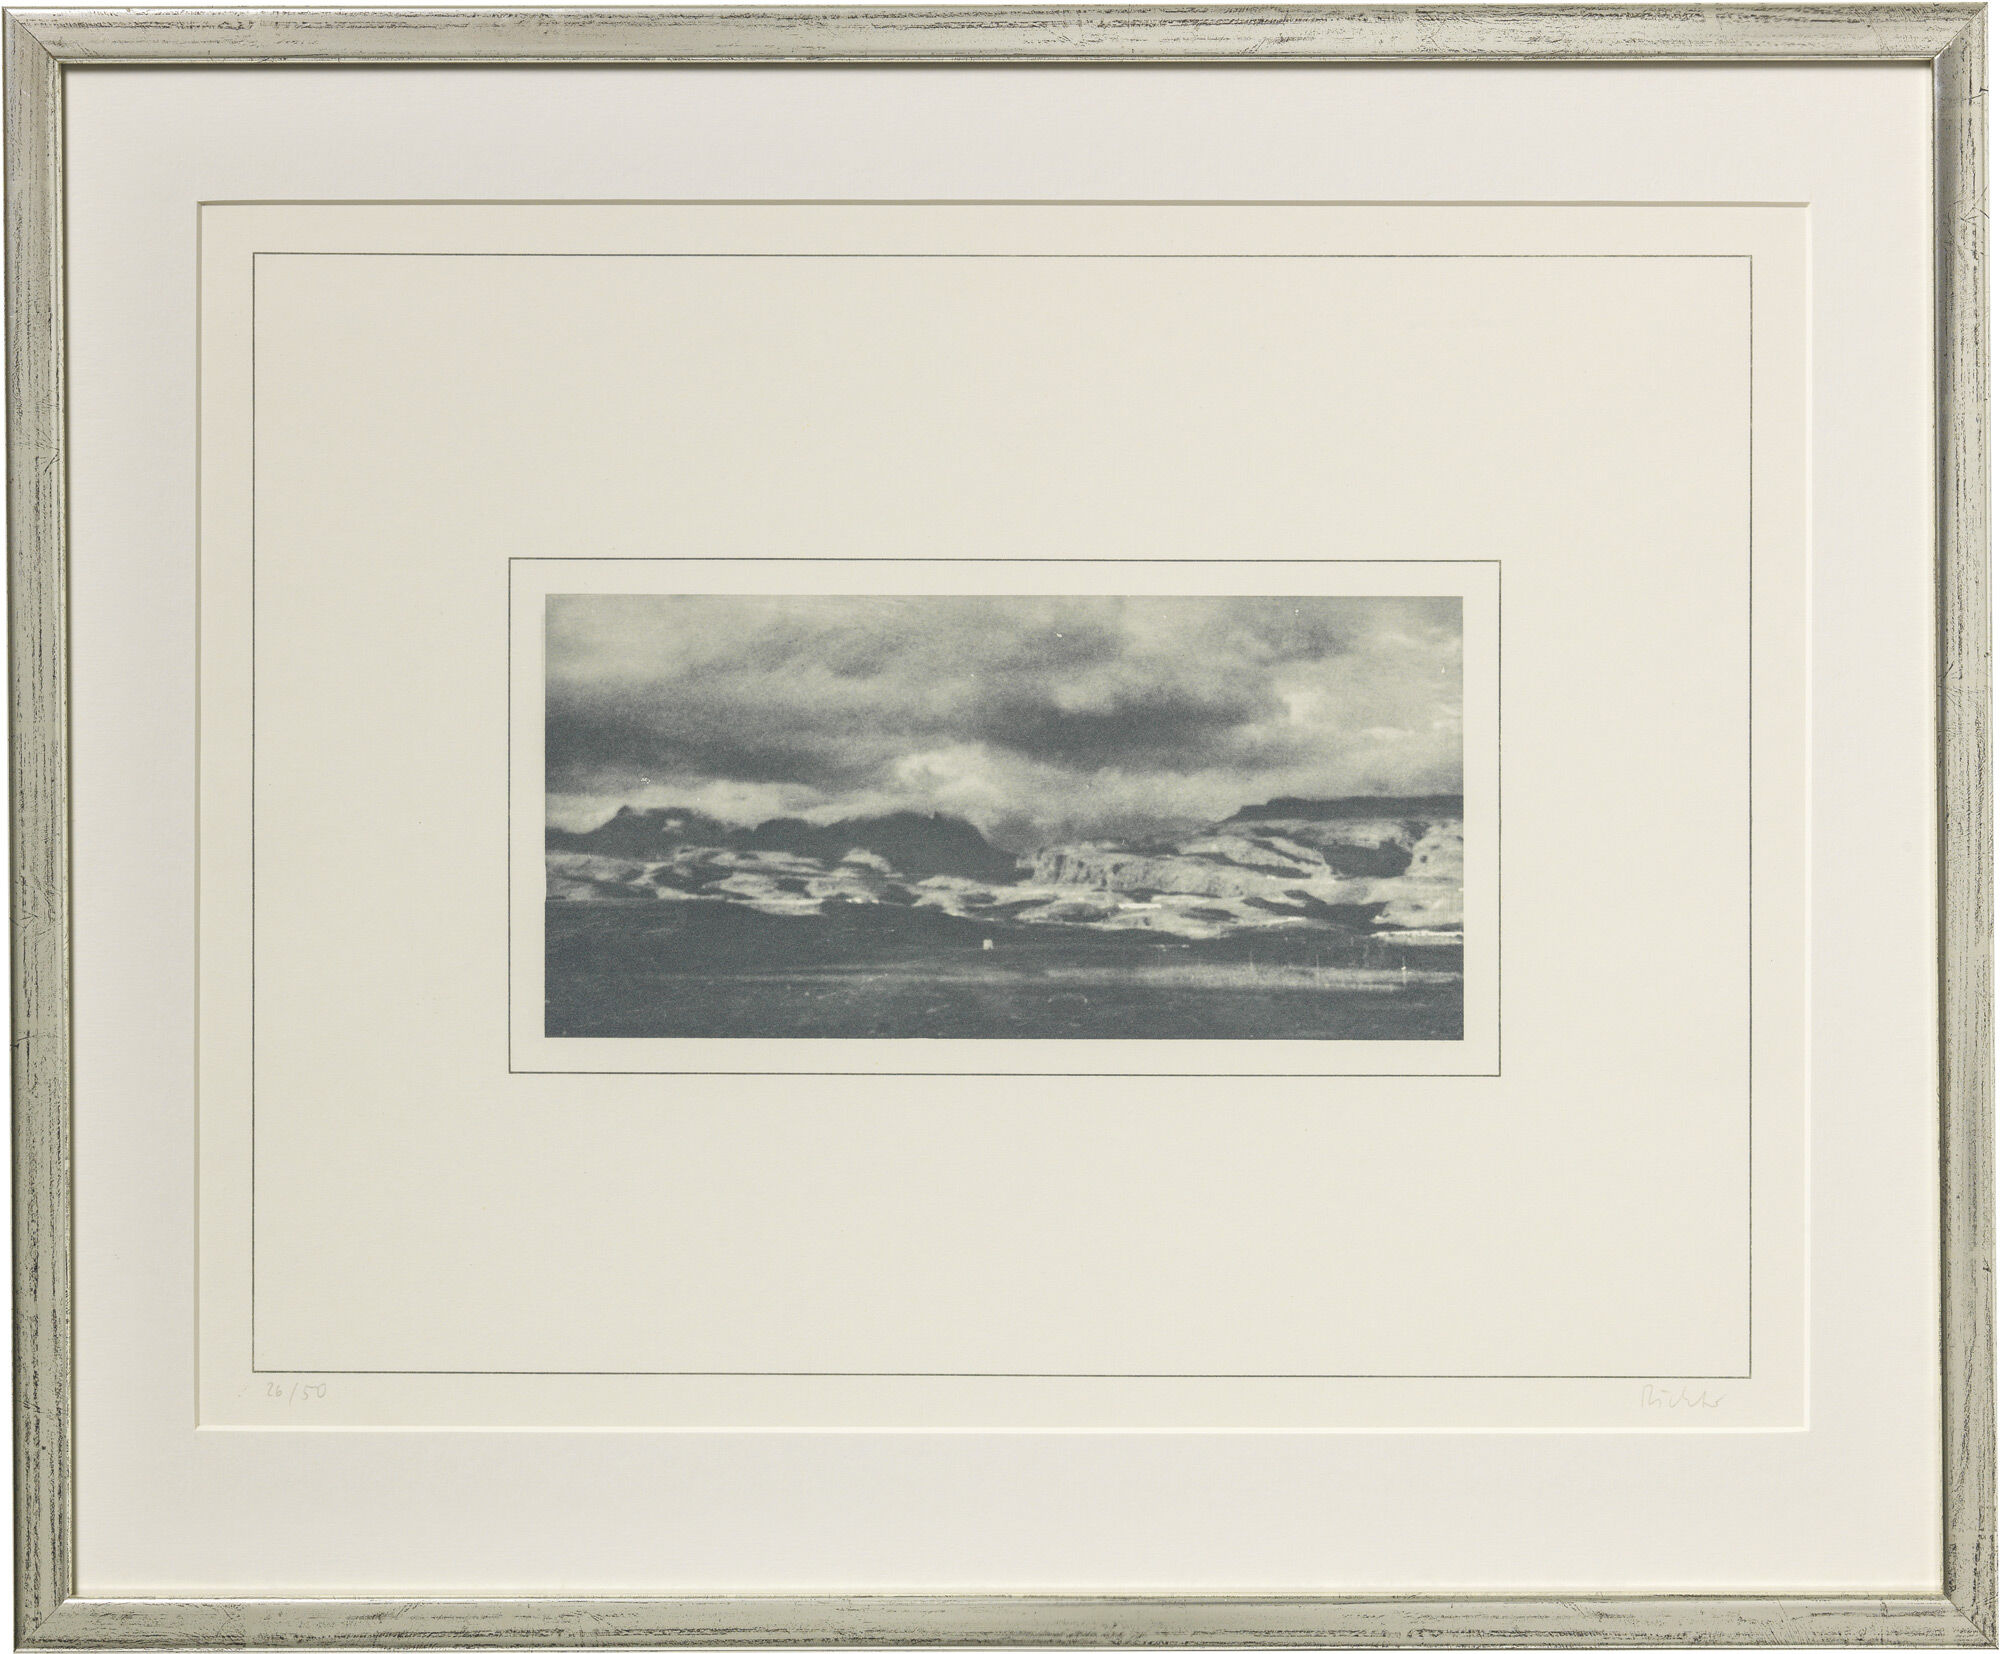 Picture "Canary Landscapes II" (1971) by Gerhard Richter